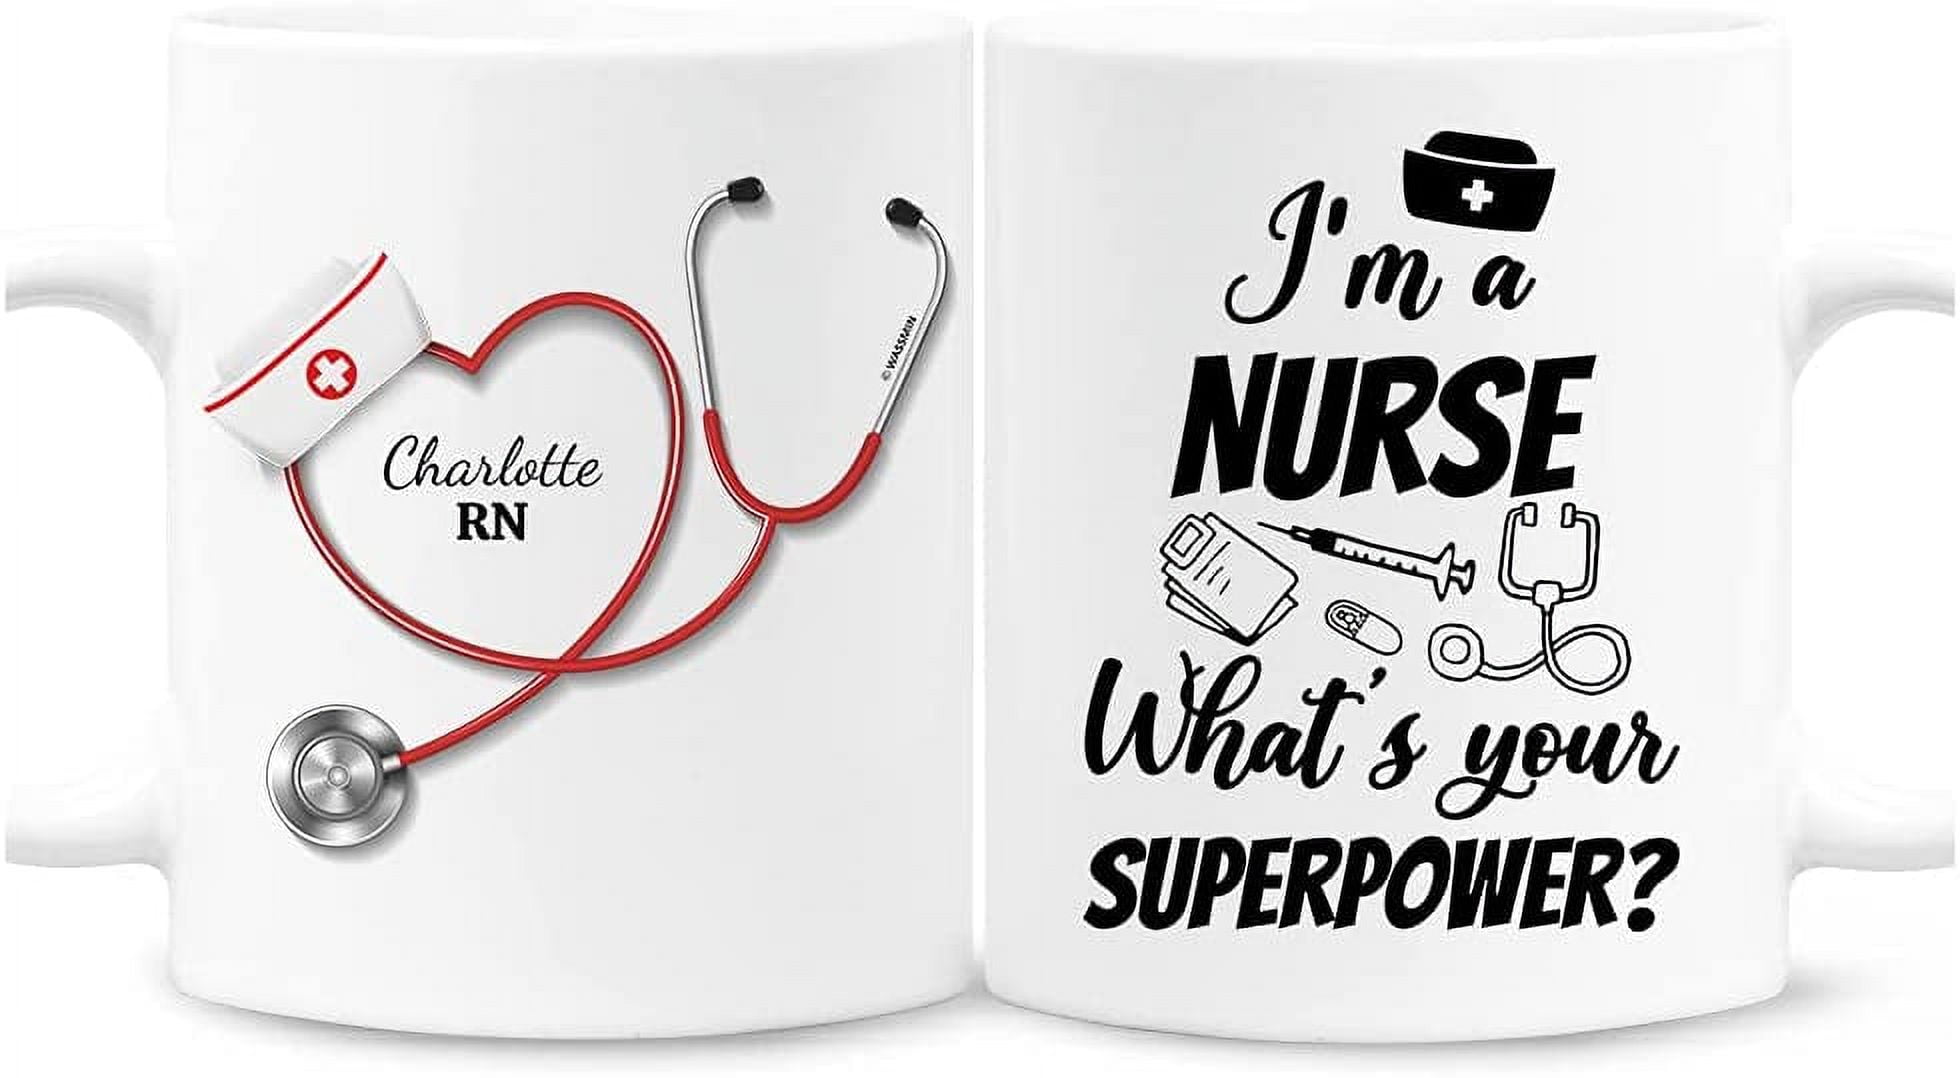 Buy CRAFT MANIACS Personalized Stethoscope with Name Printed Ceramic  Tea/Coffee Mug for Your FAV Doctor / Medical Professional (White ( White  Mug with Name )) Online at Low Prices in India 